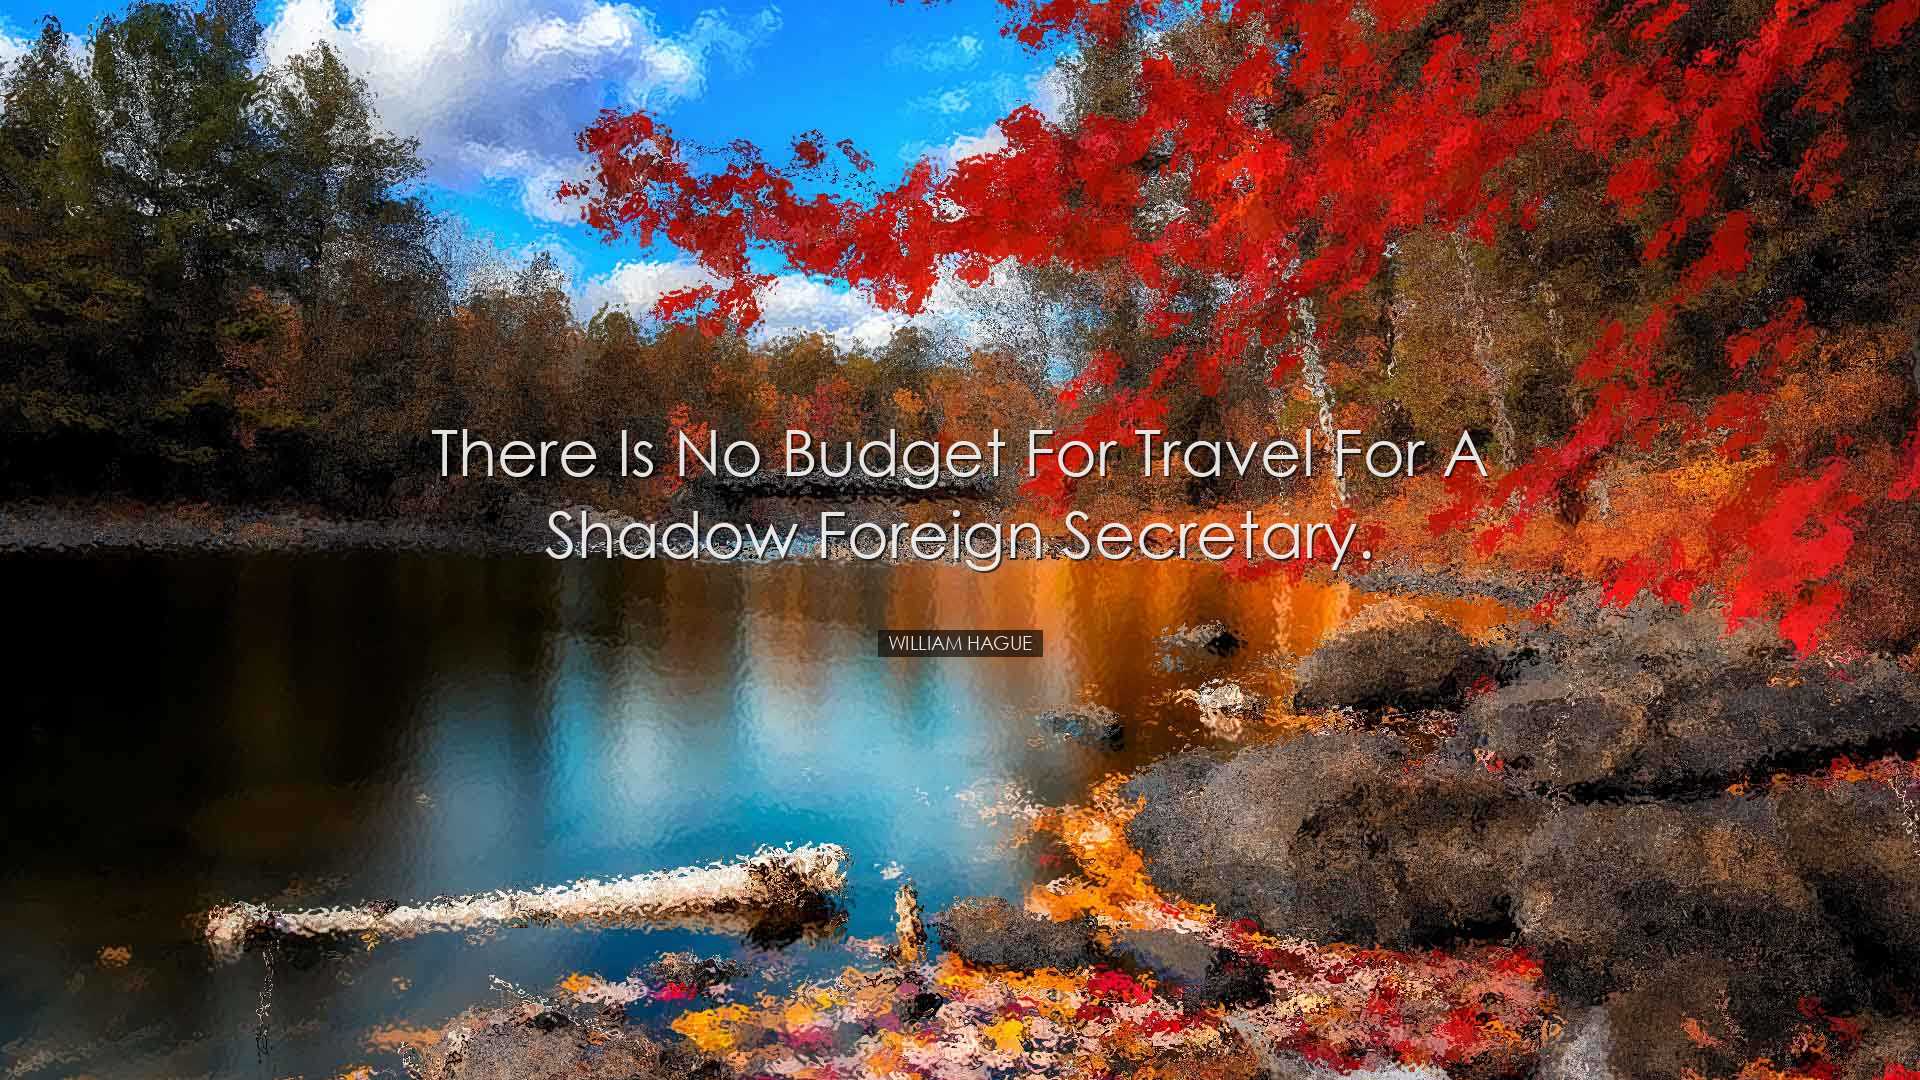 There is no budget for travel for a Shadow Foreign Secretary. - Wi